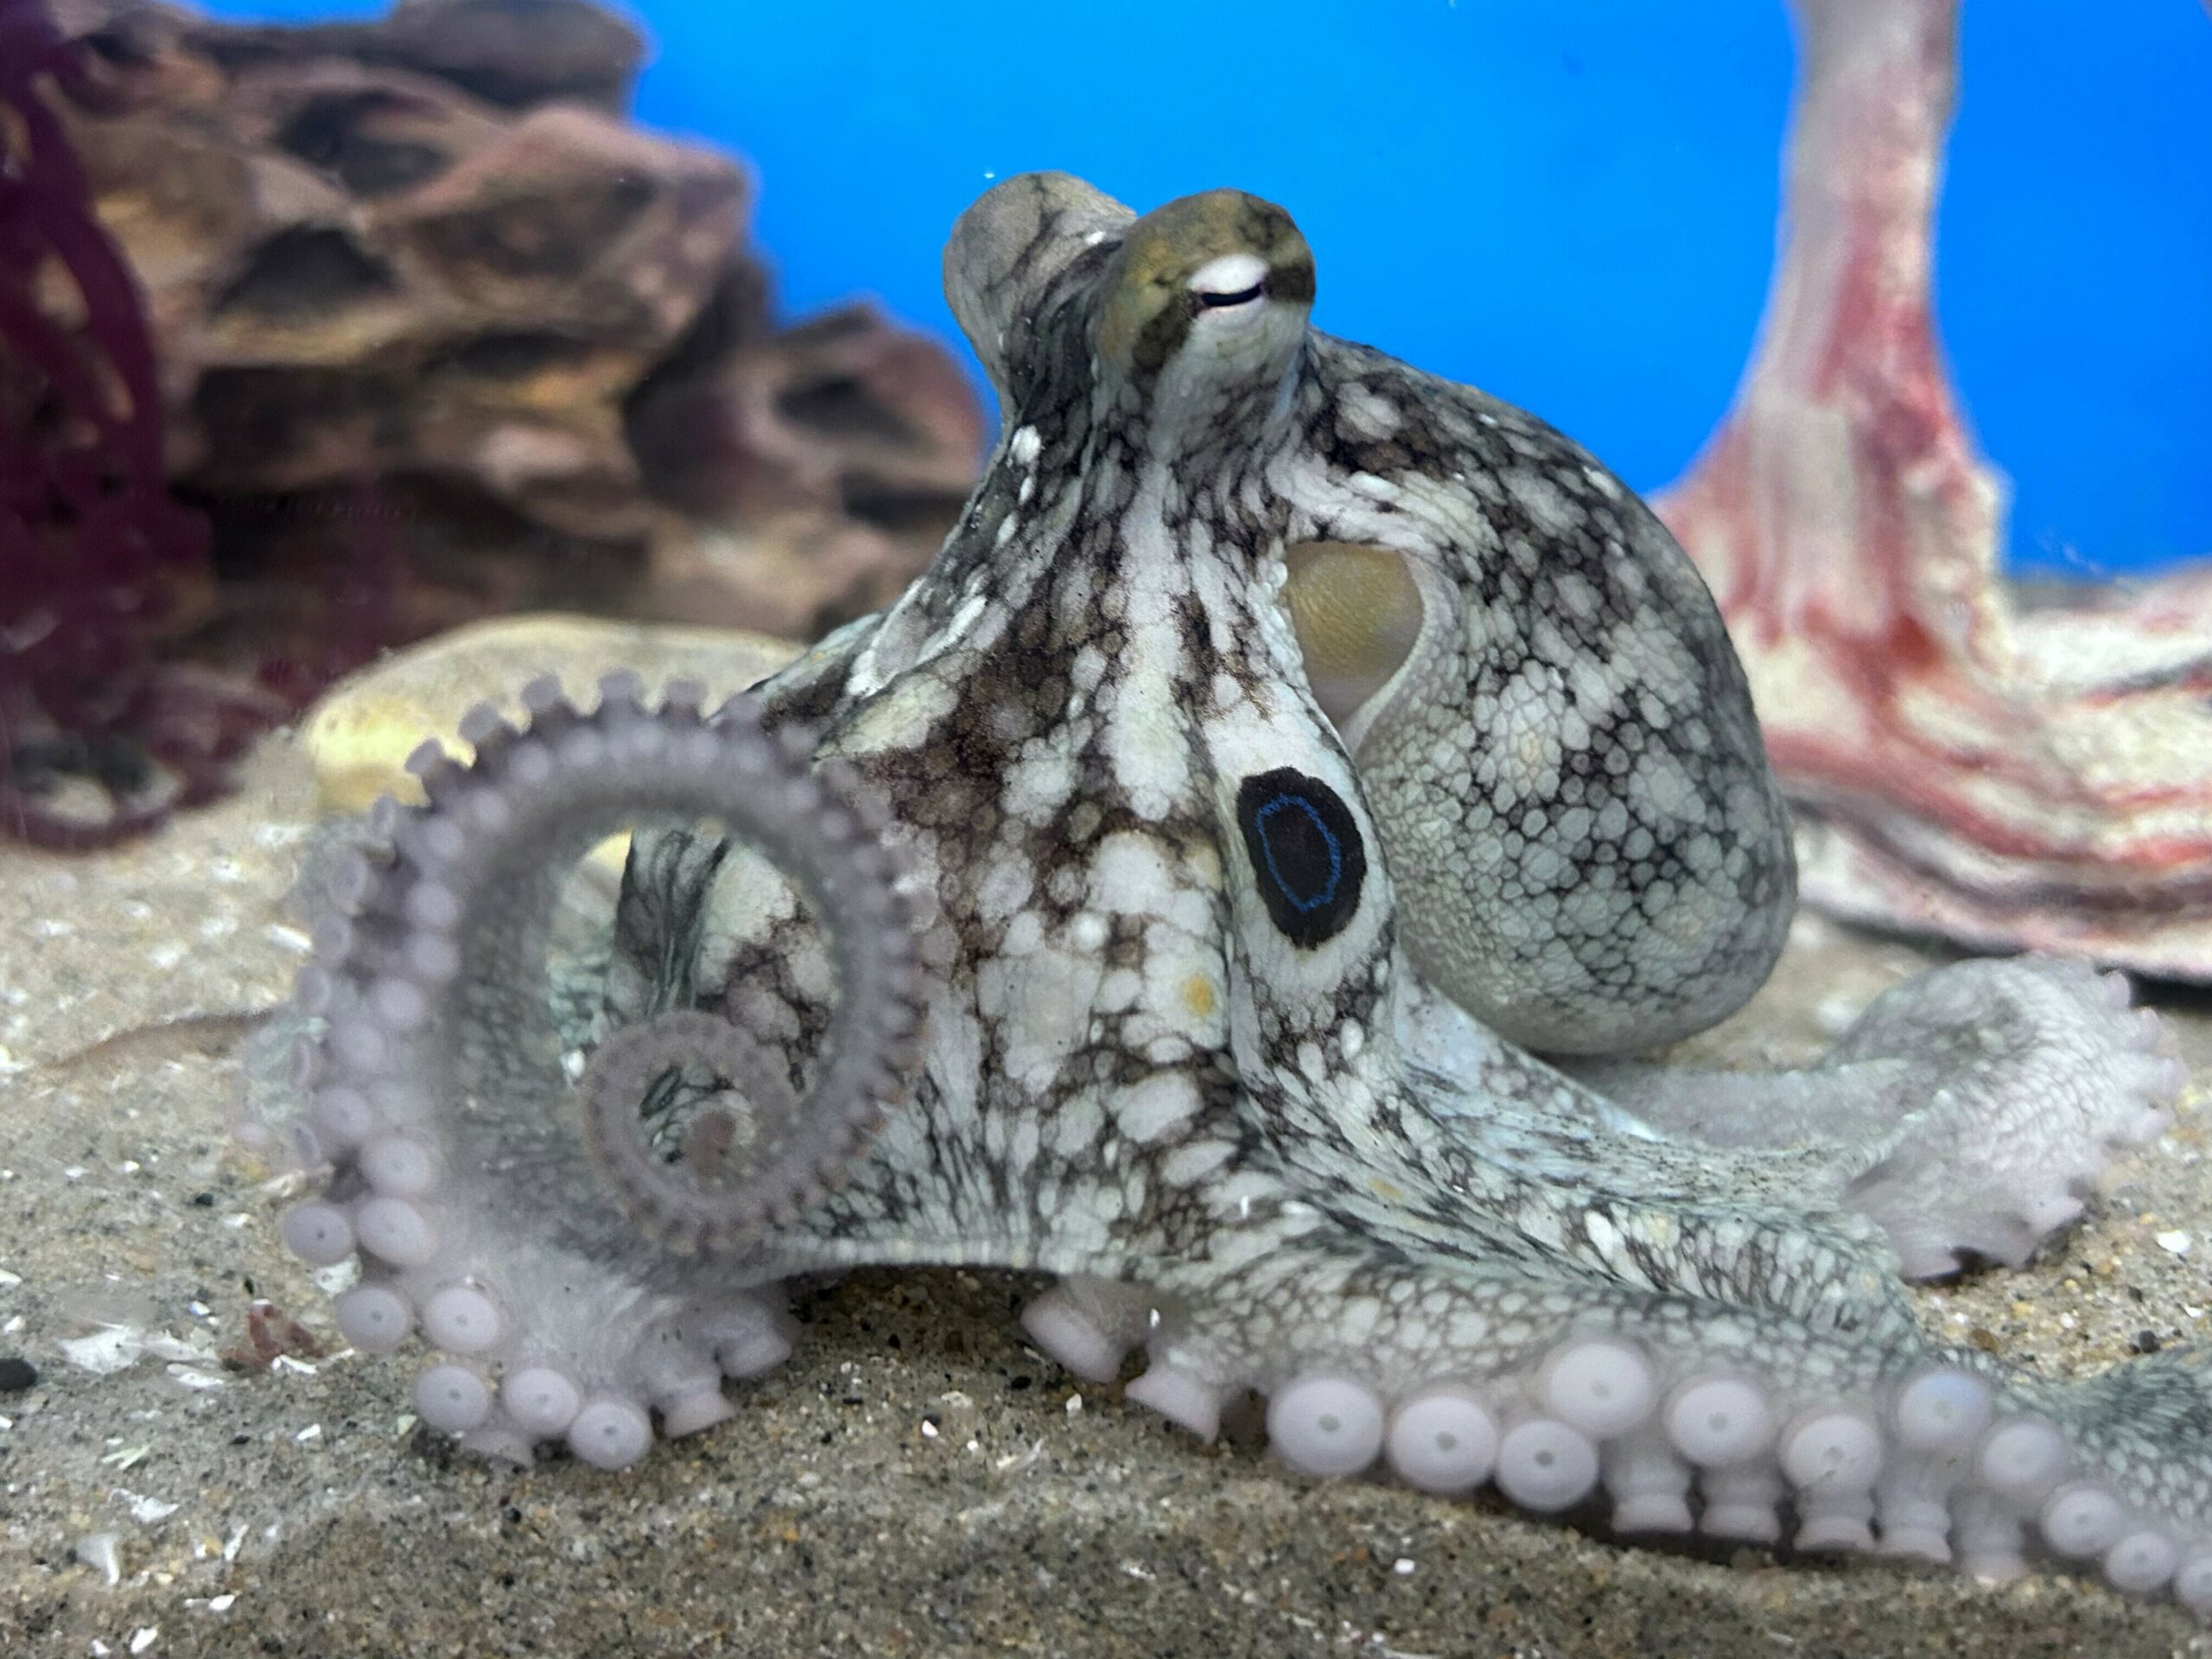 Terrance the octopus came to live with a family. Then she laid dozens of eggs